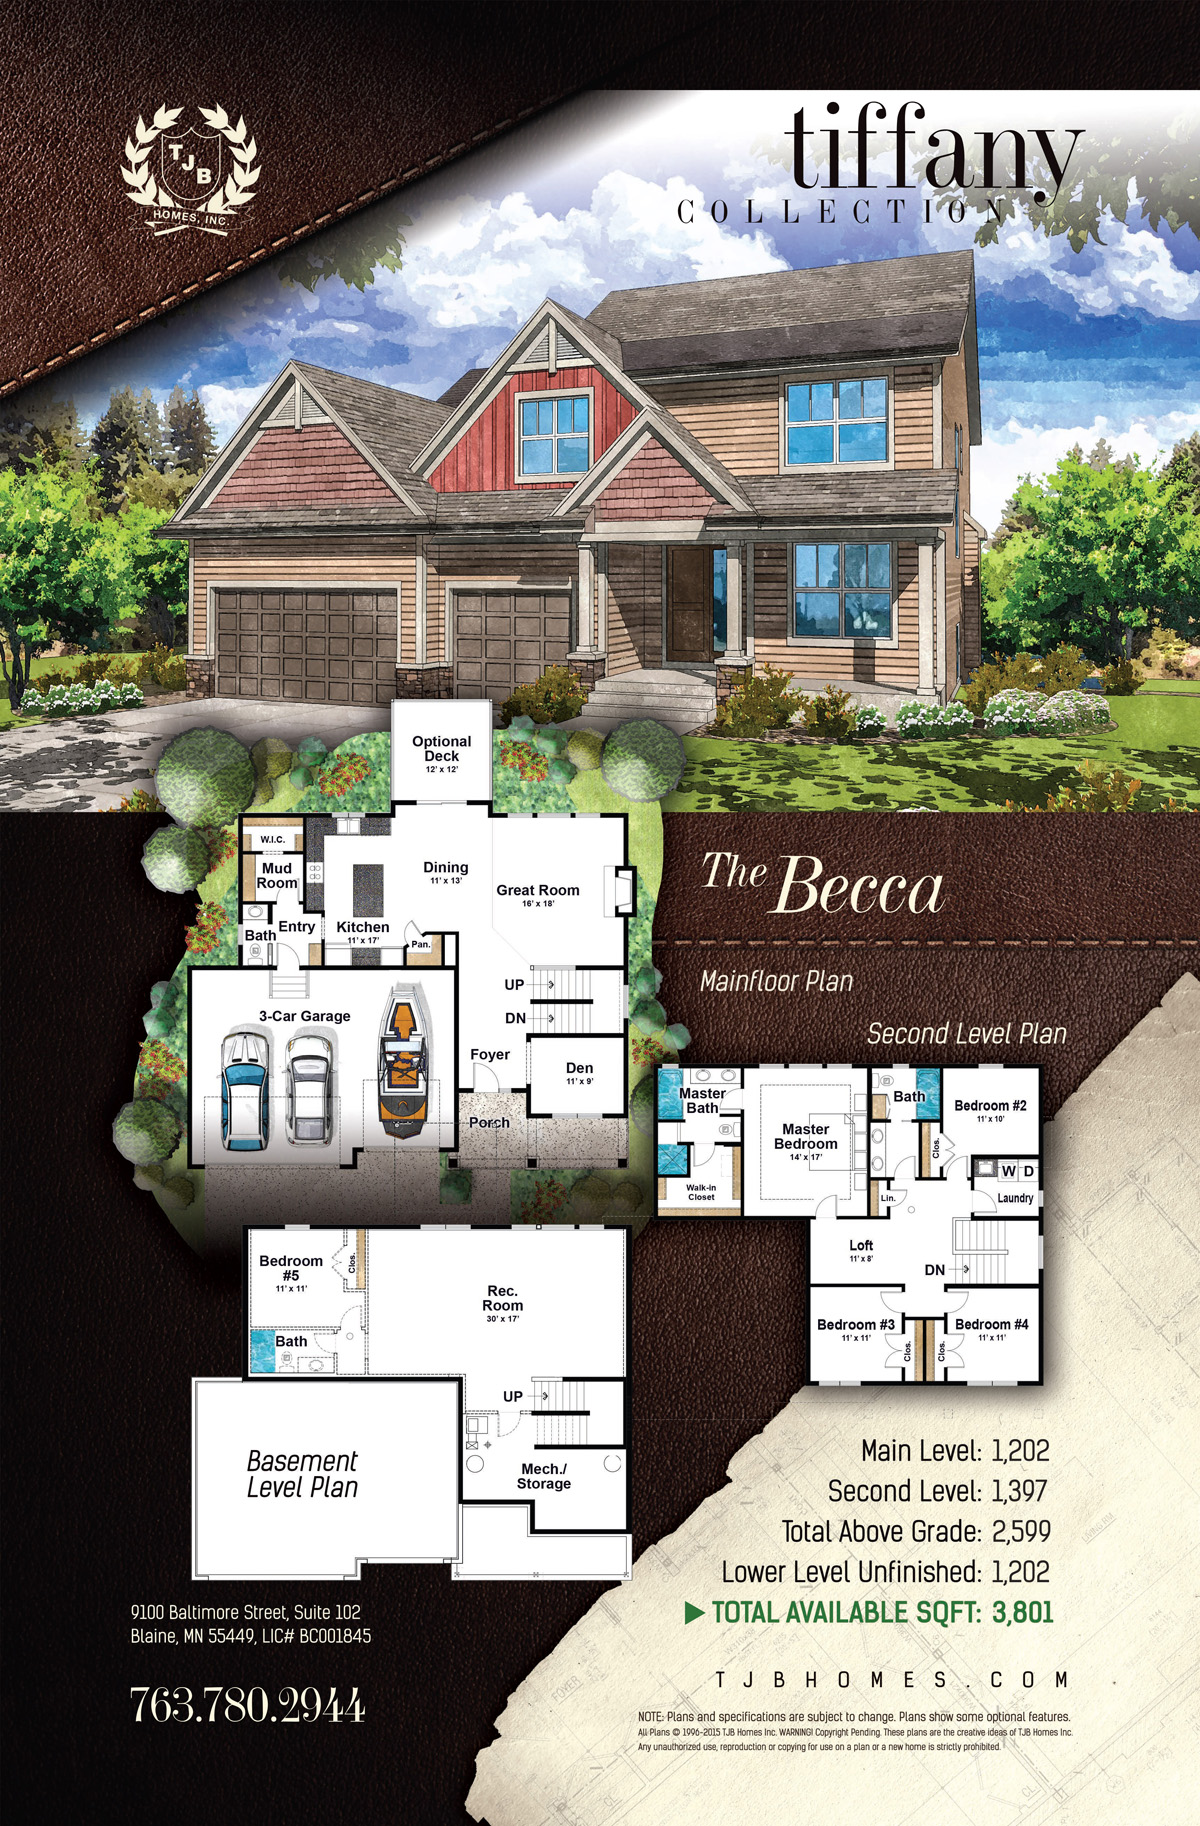 The Becca Home Plan